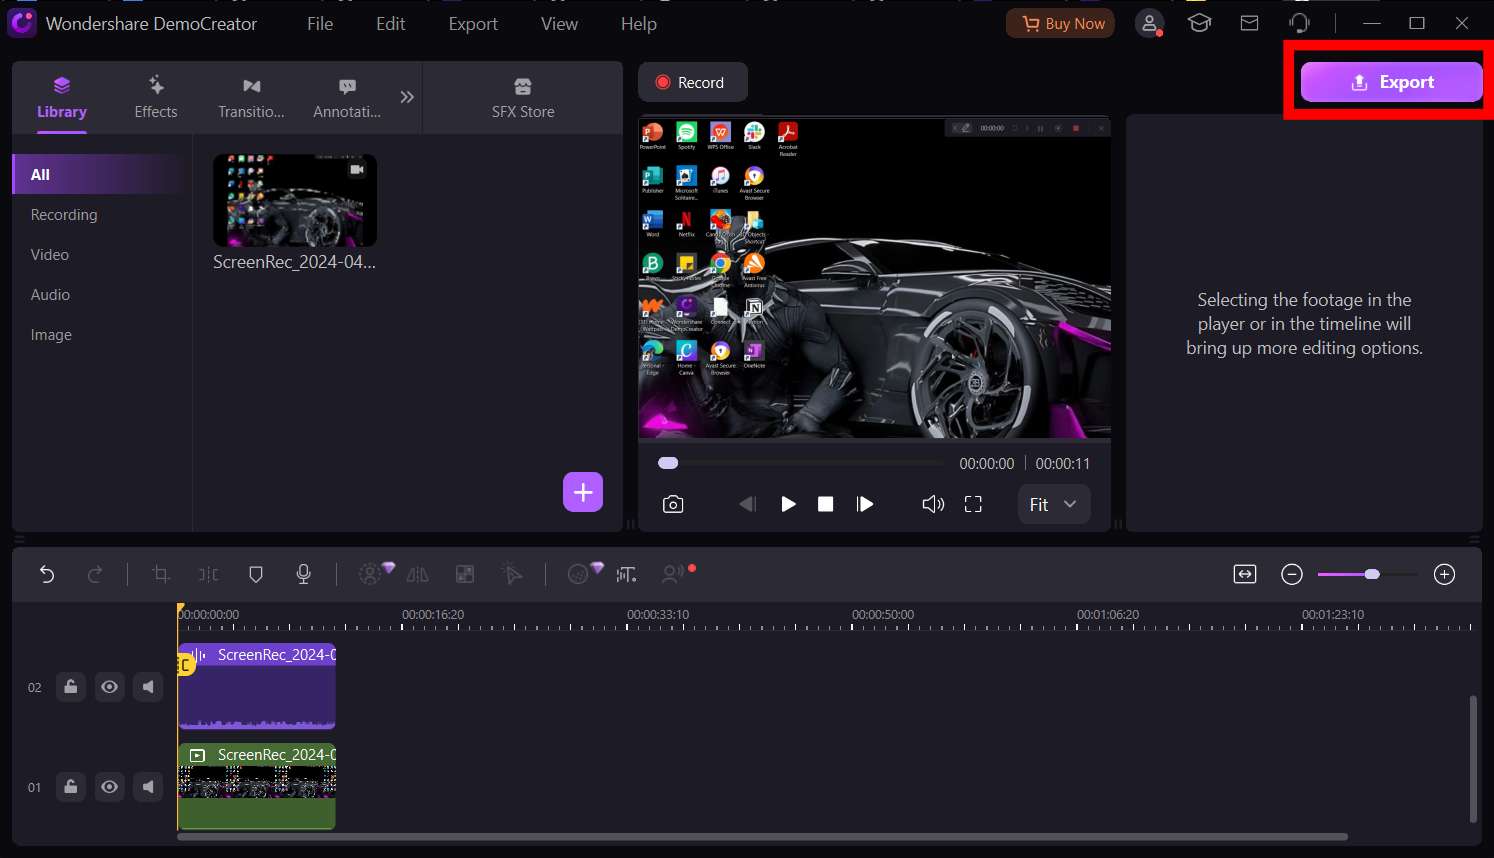 a screenshot showing the export button in democreator's editing suite